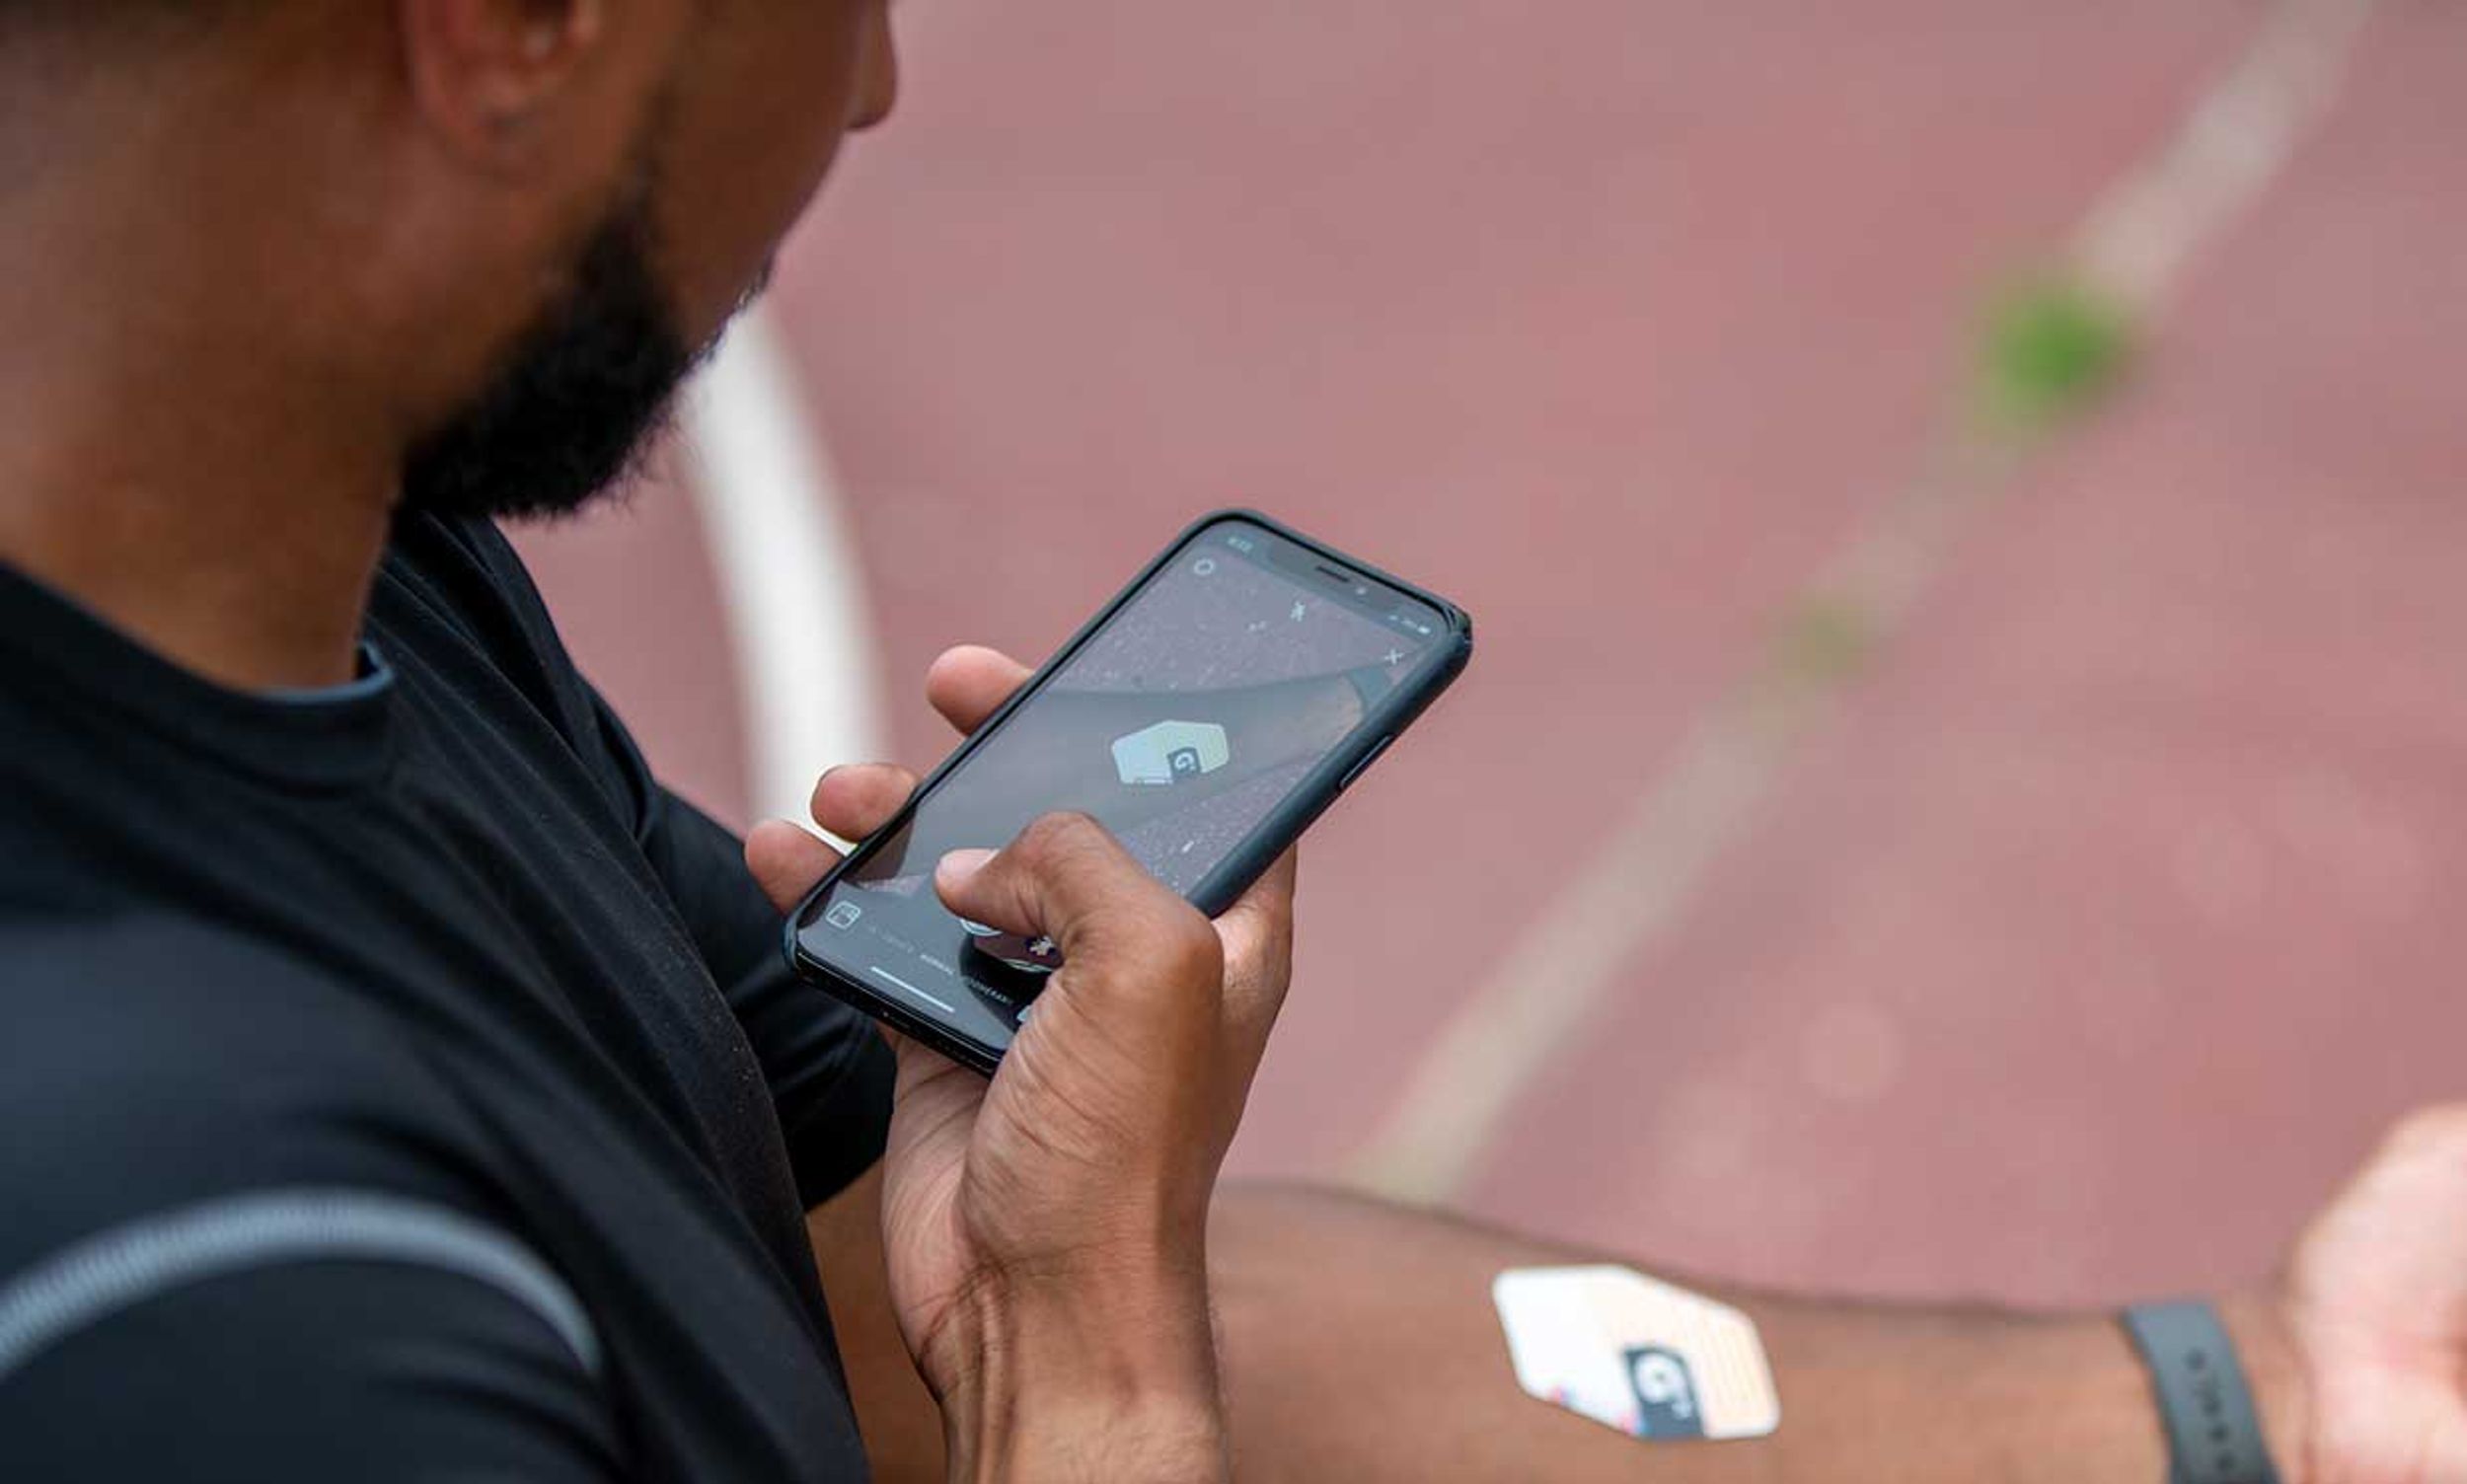 A man holding a smartphone scans his Gx Sweat Patch.